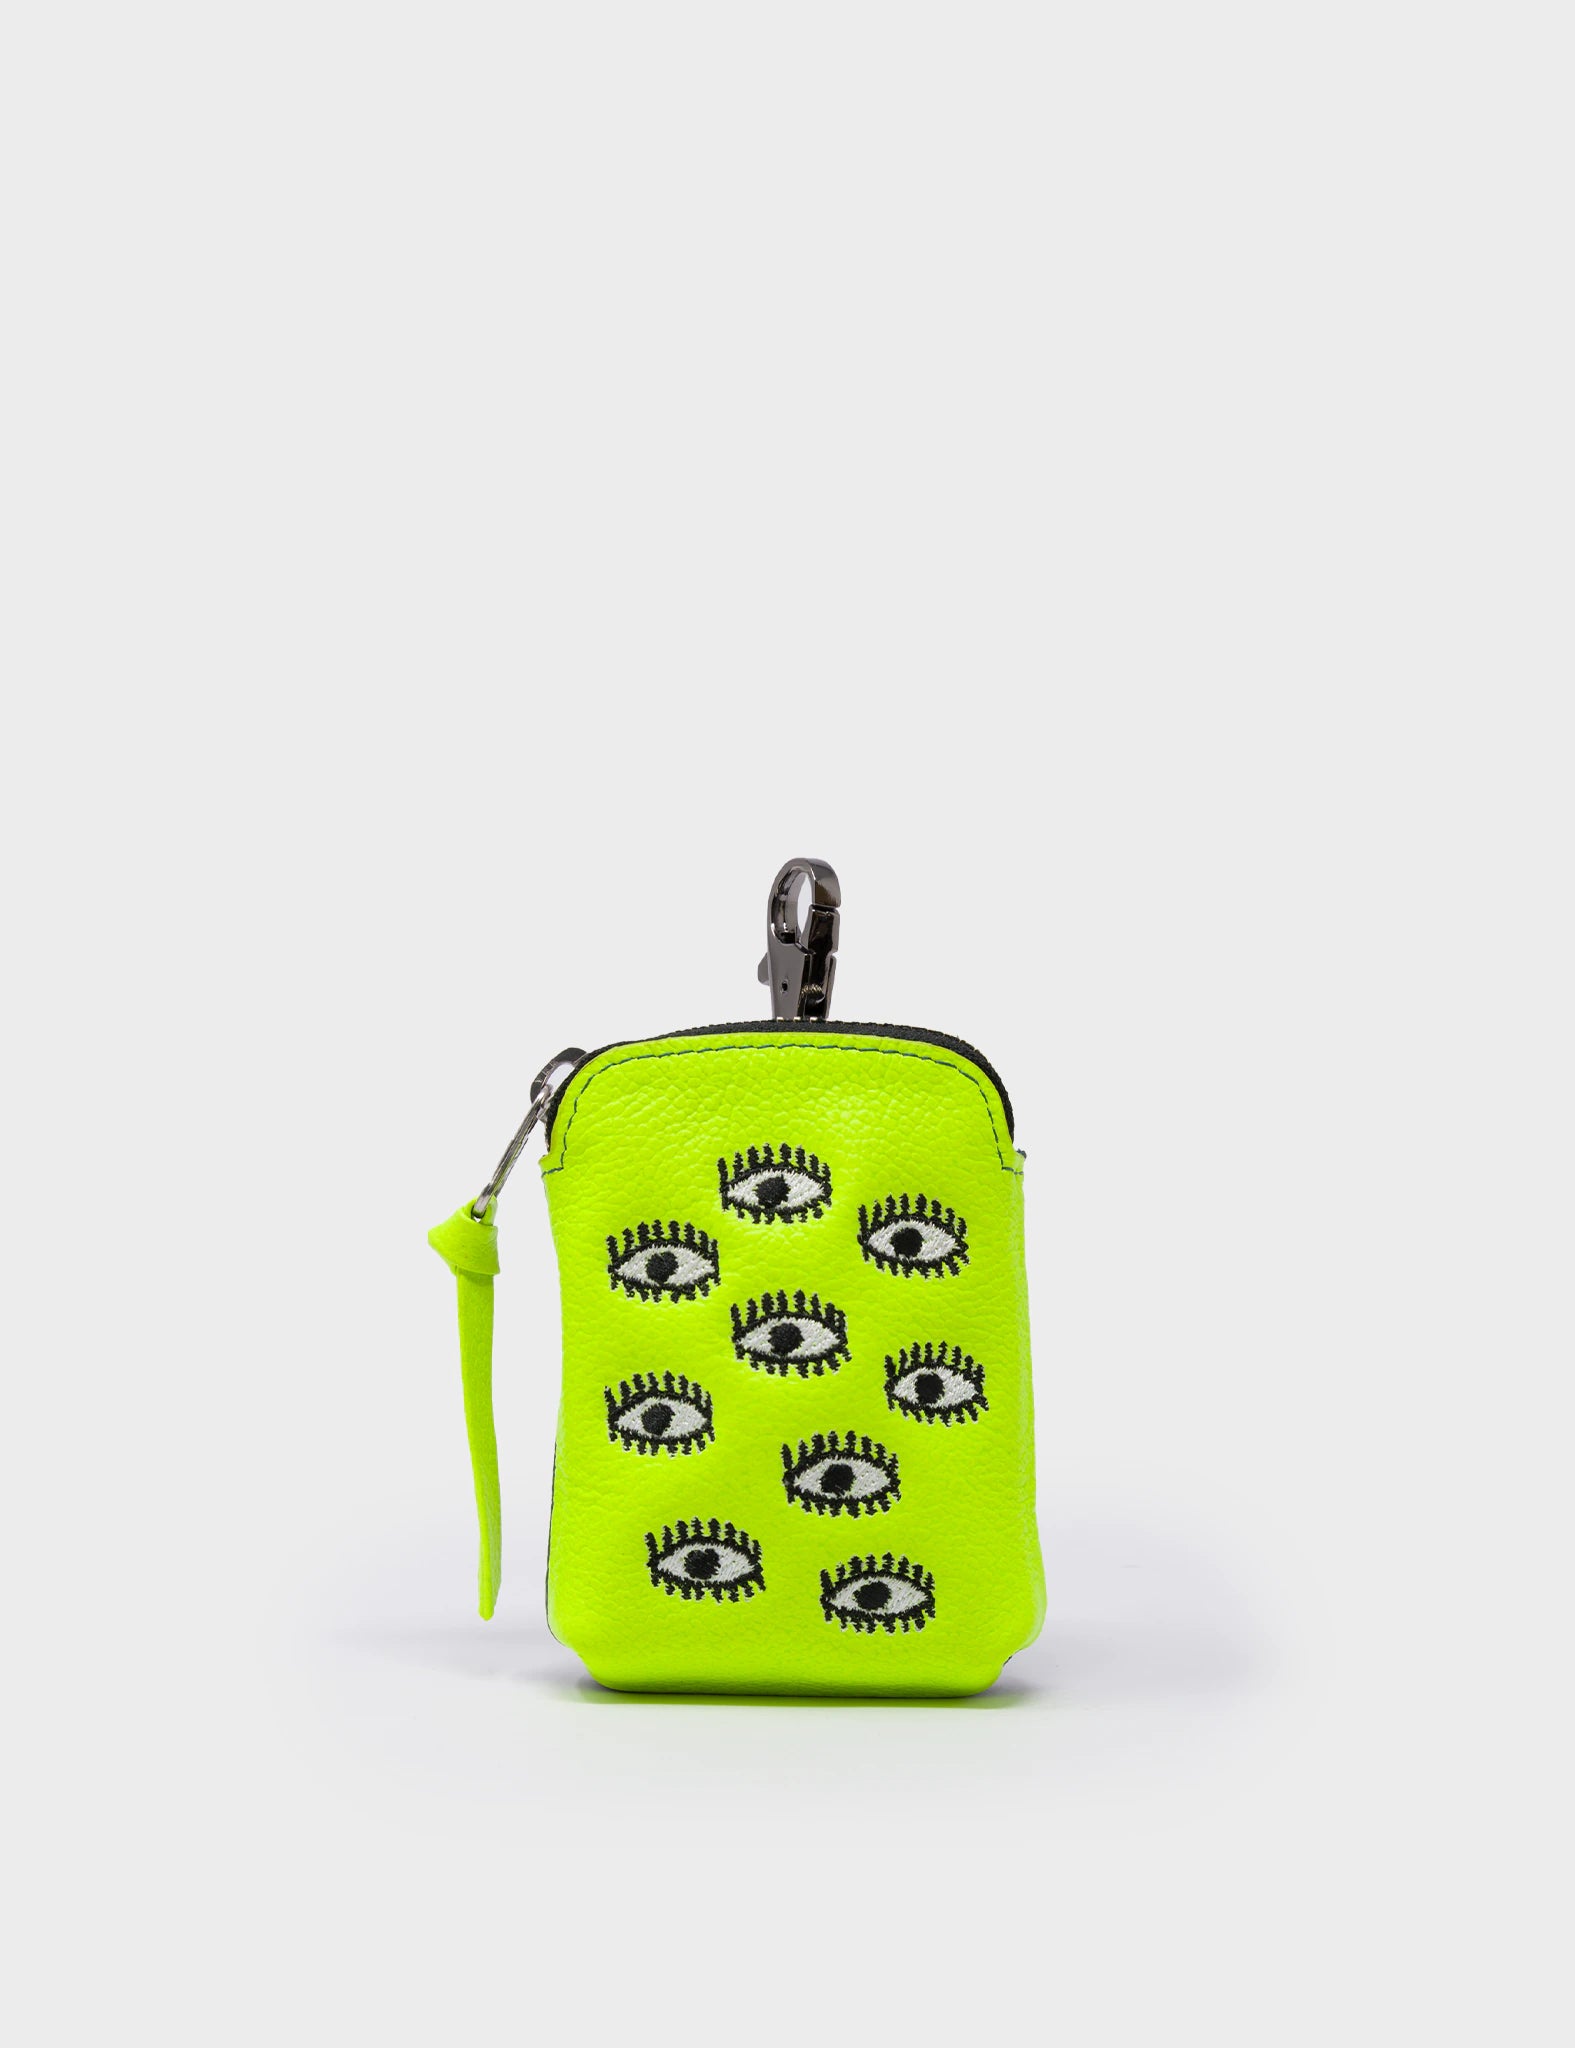 Florence Pouch Charm - Neon Yellow Leather Keychain Eyes Embroidery